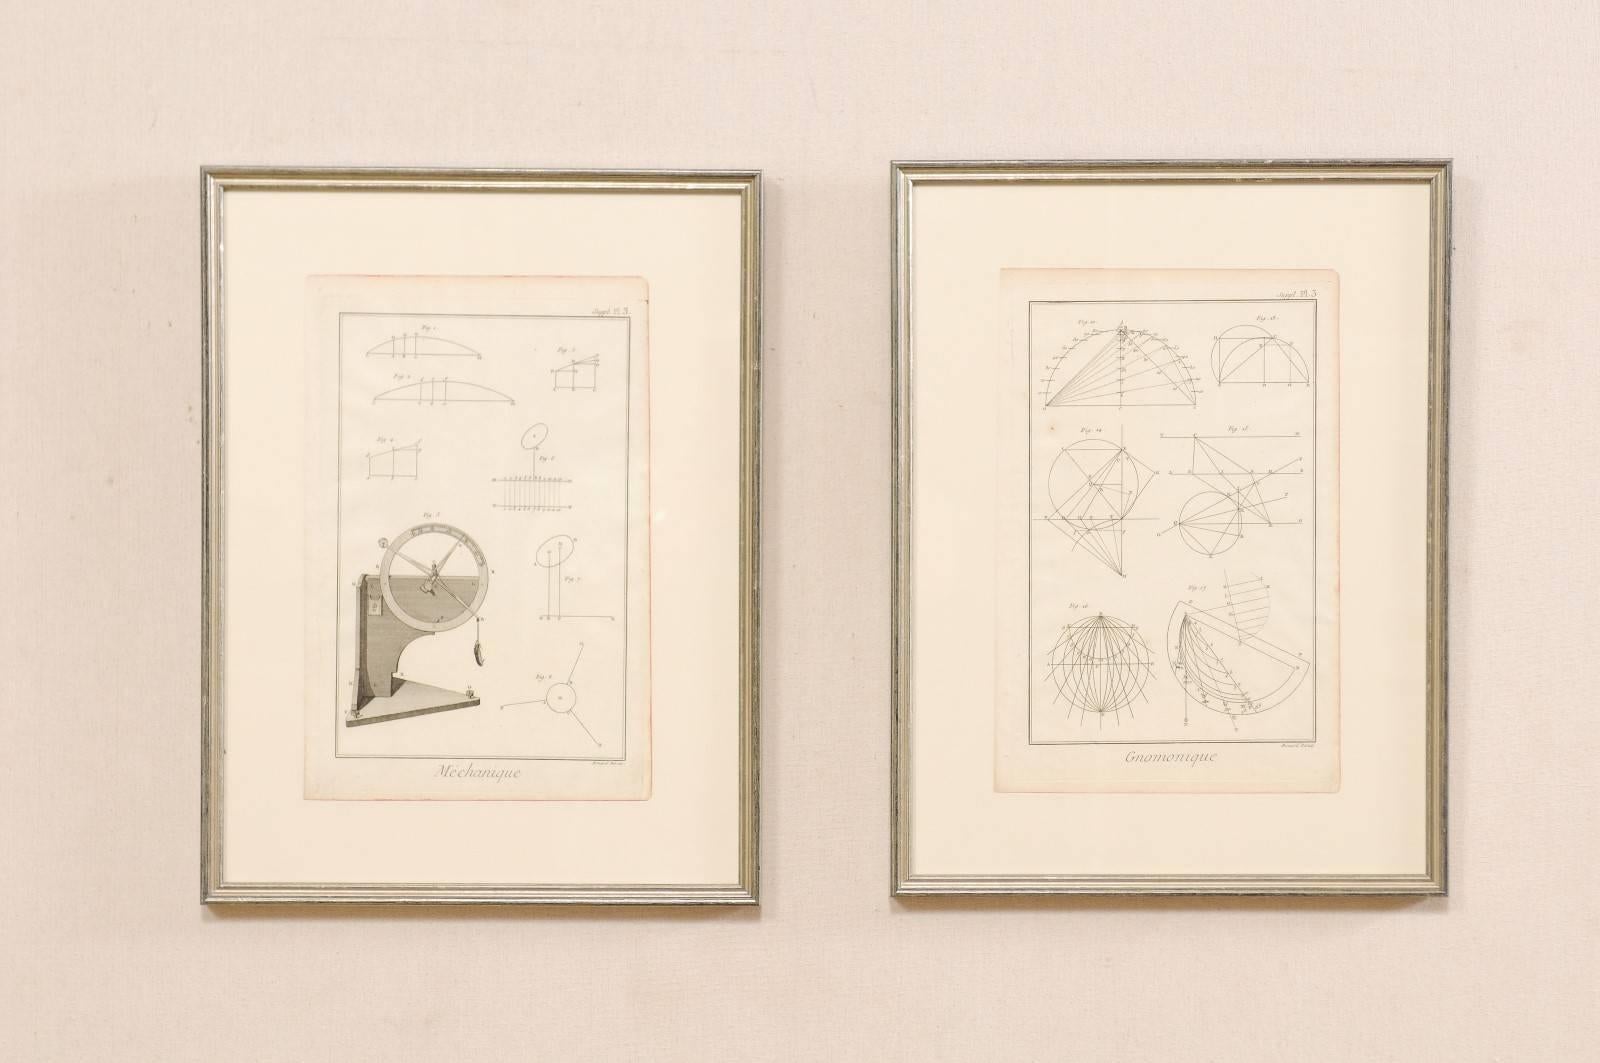 A pair of framed French, 18th century Bernard Direx renderings. This is a pair of framed mechanical and geometric renderings from French artist Bernard Direx. Each rendering was originally part of a larger book, and are copper plate engraved (a